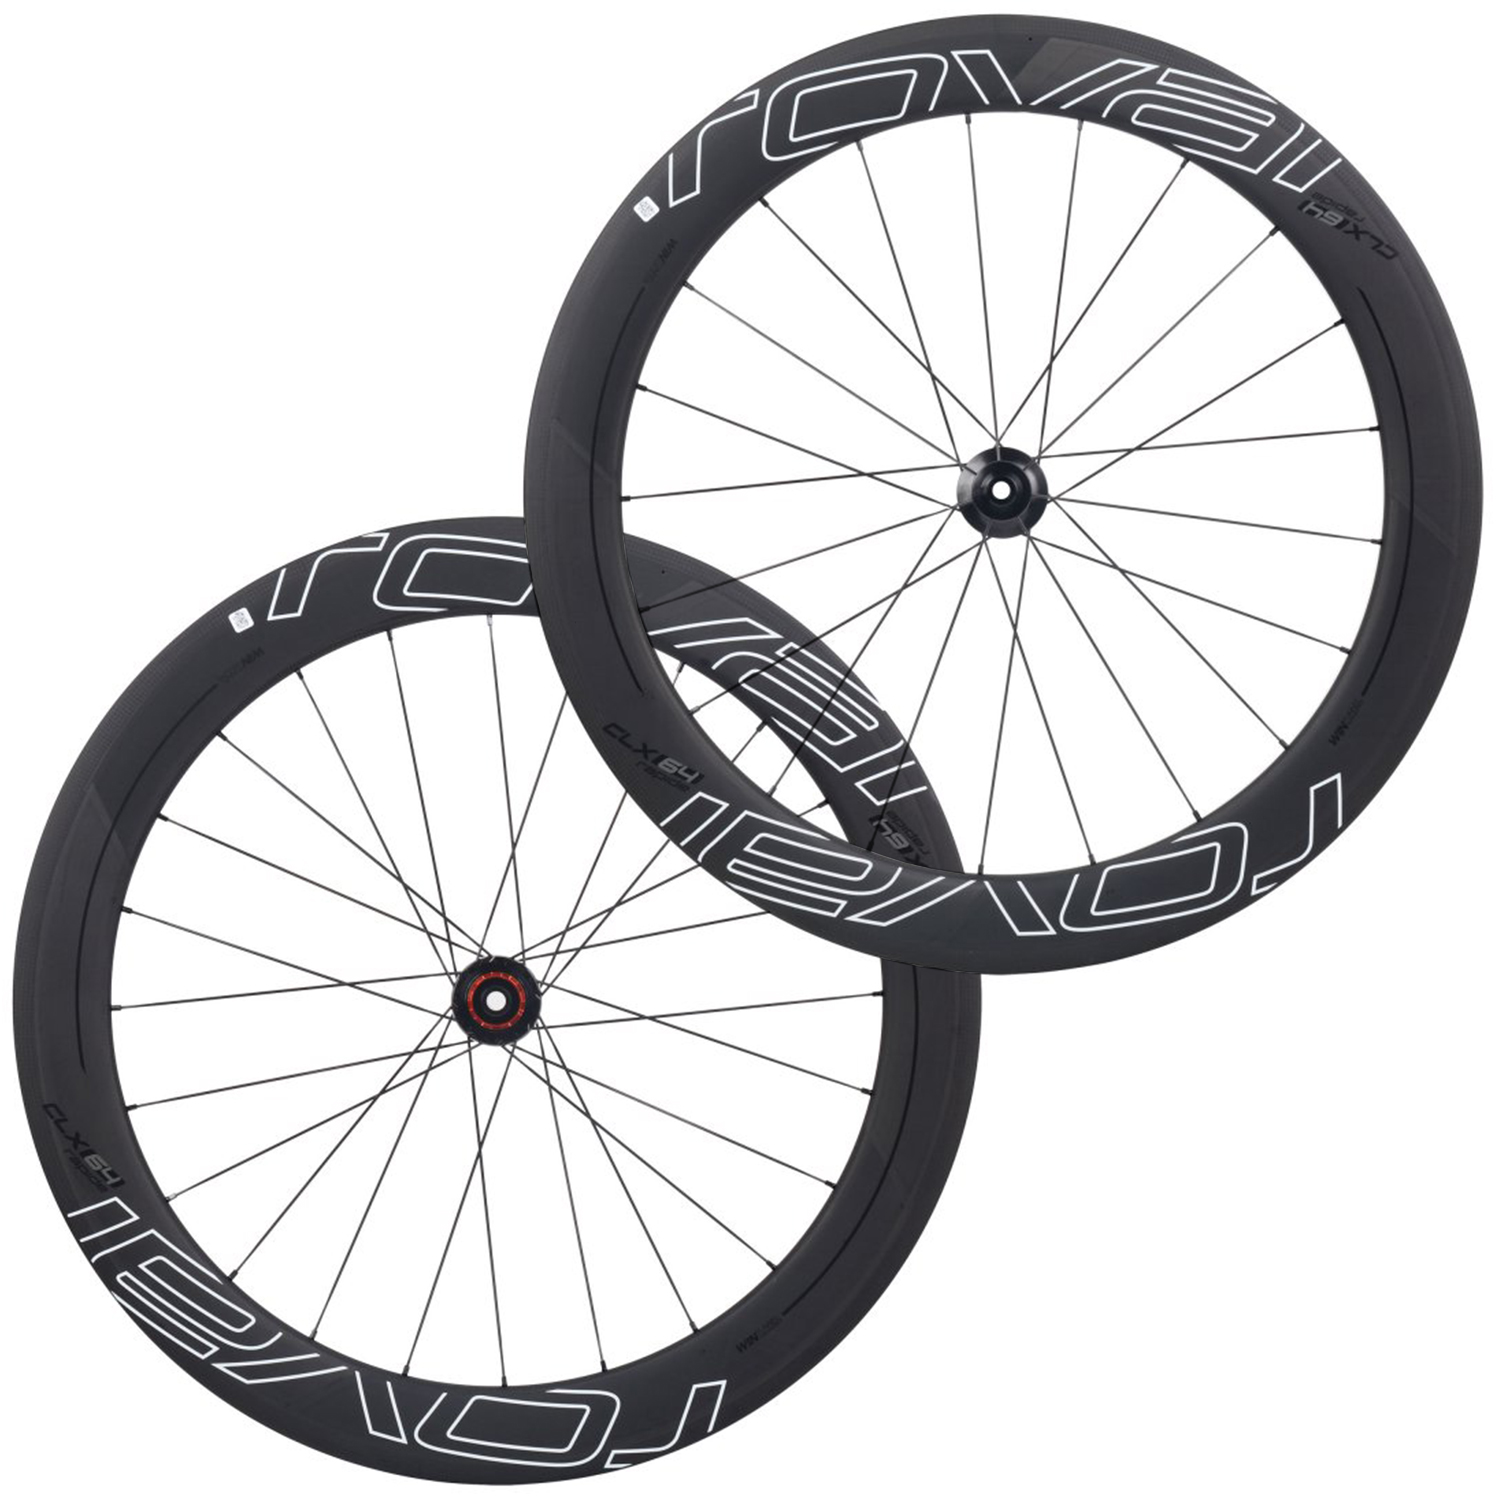 Roval Rapide CLX 64 Disc Tubular Road Wheels - 700c Black / White Decal /  Shimano / 12mm Front - 142x12mm Rear / Centerlock / Pair / 10-11 Speed / 